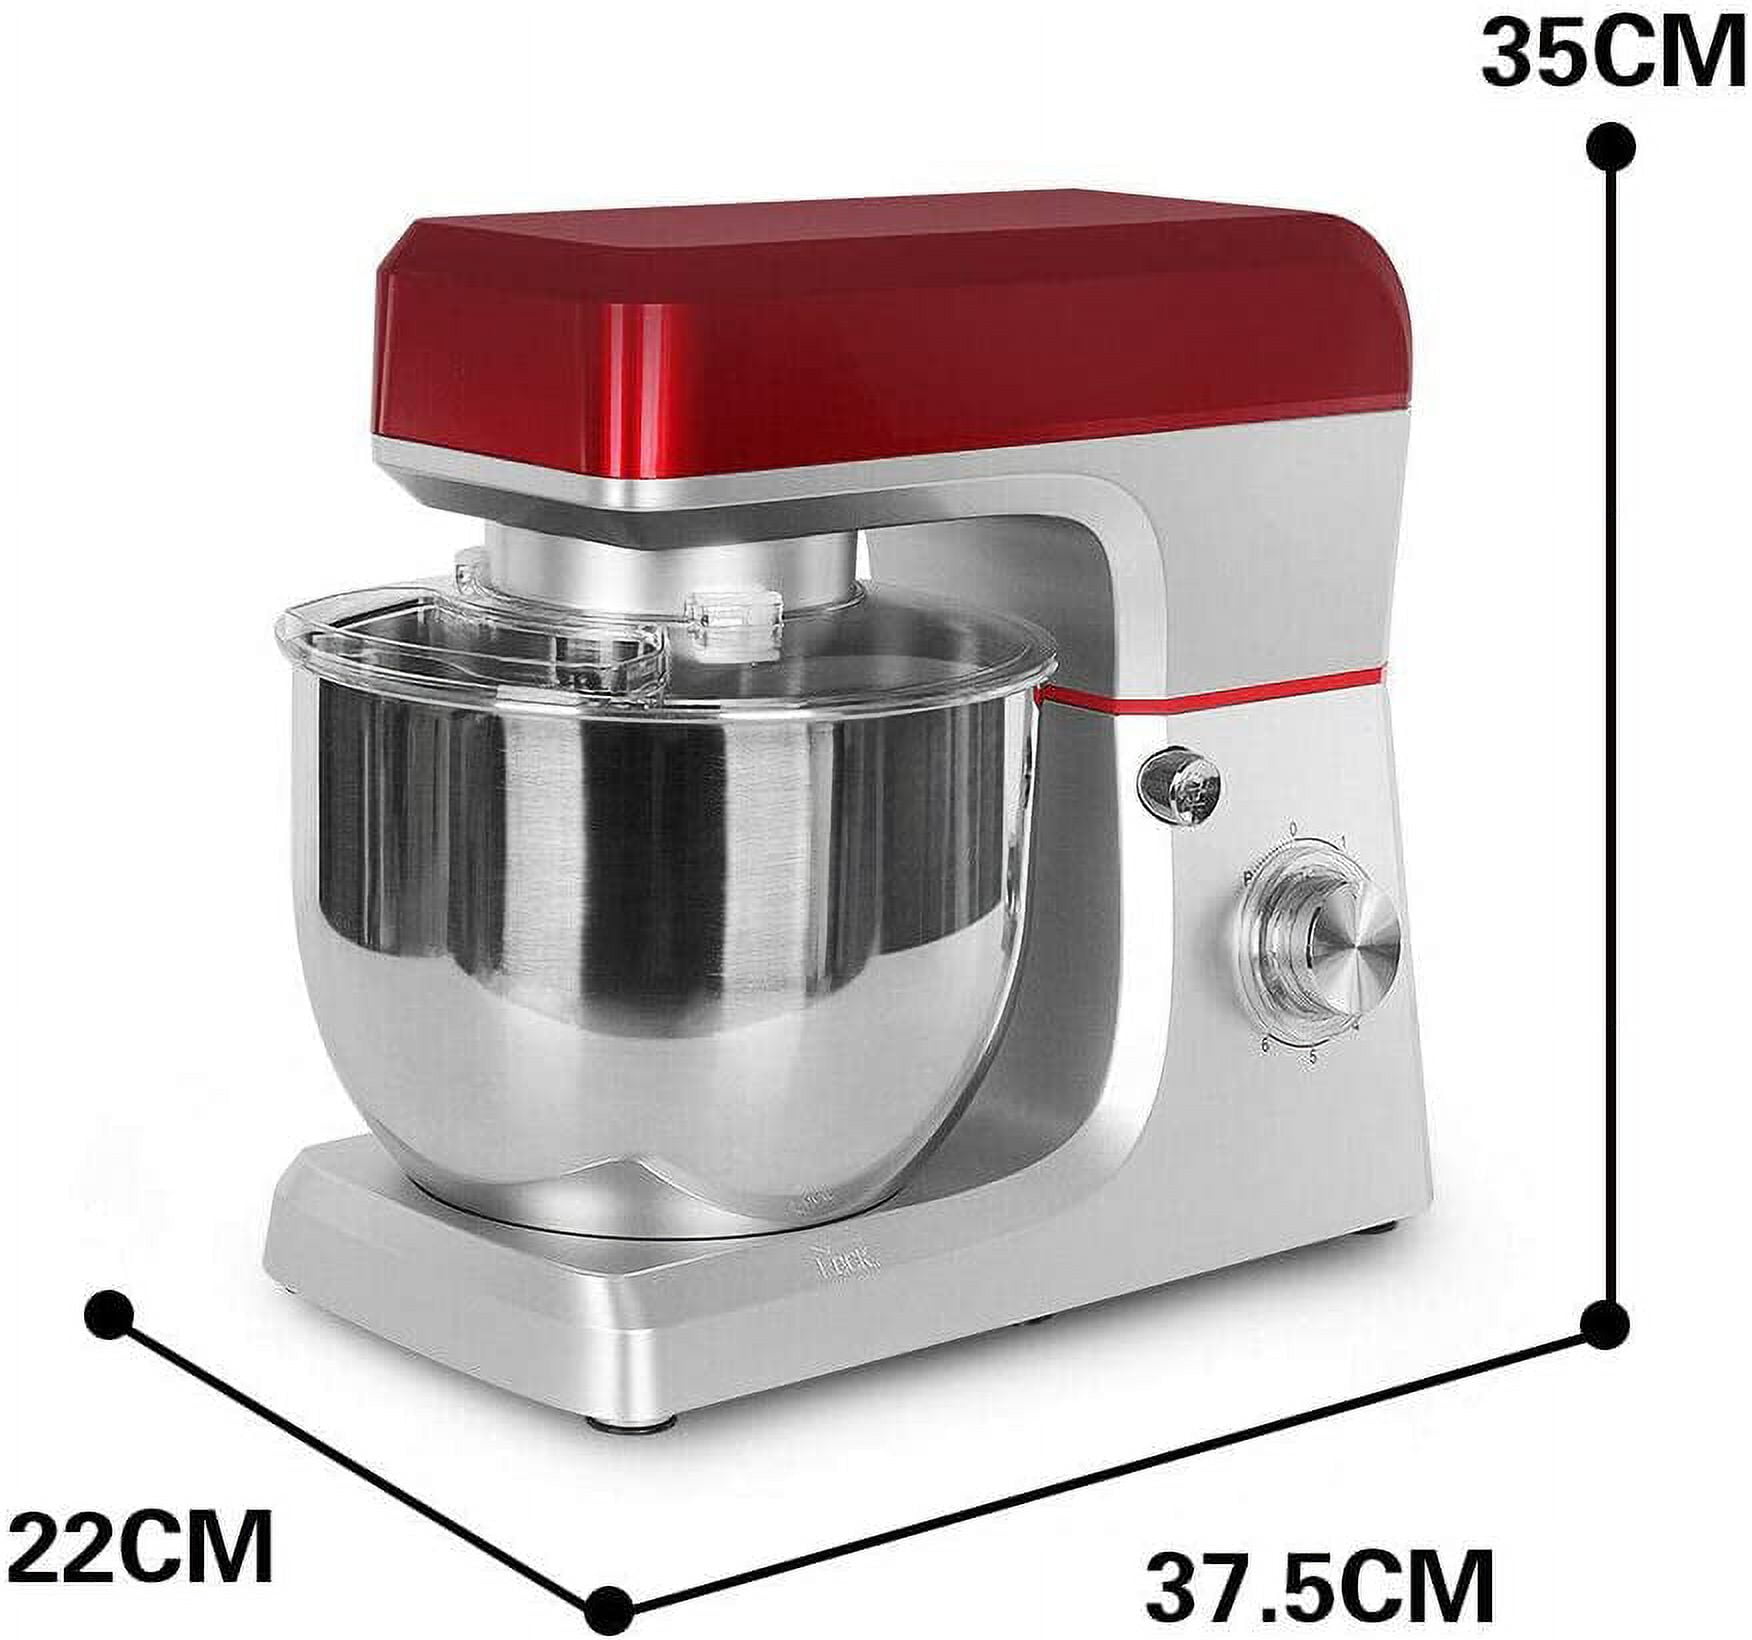 Stand Mixer Commercial Stand Mixer Household Kitchen Electric Mixer 6 Speed  Tilt Head Food Dough Mixers with Mixing Paste/Beater/Noodle Sticks for